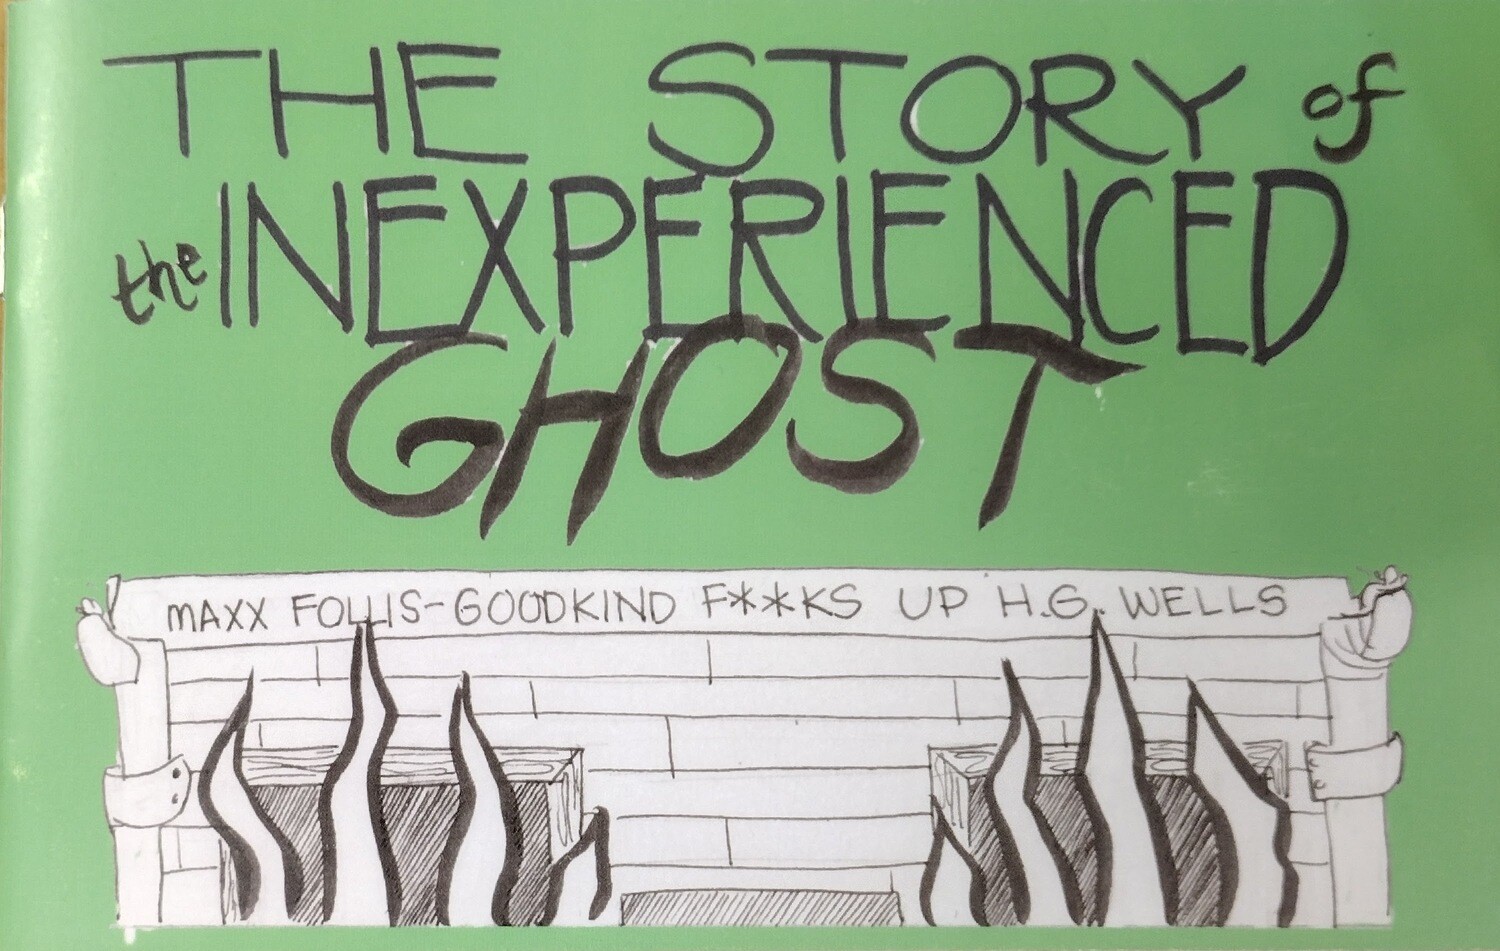 The Story of the Inexperienced Ghost - Book by Maxx Follis-Goodkind